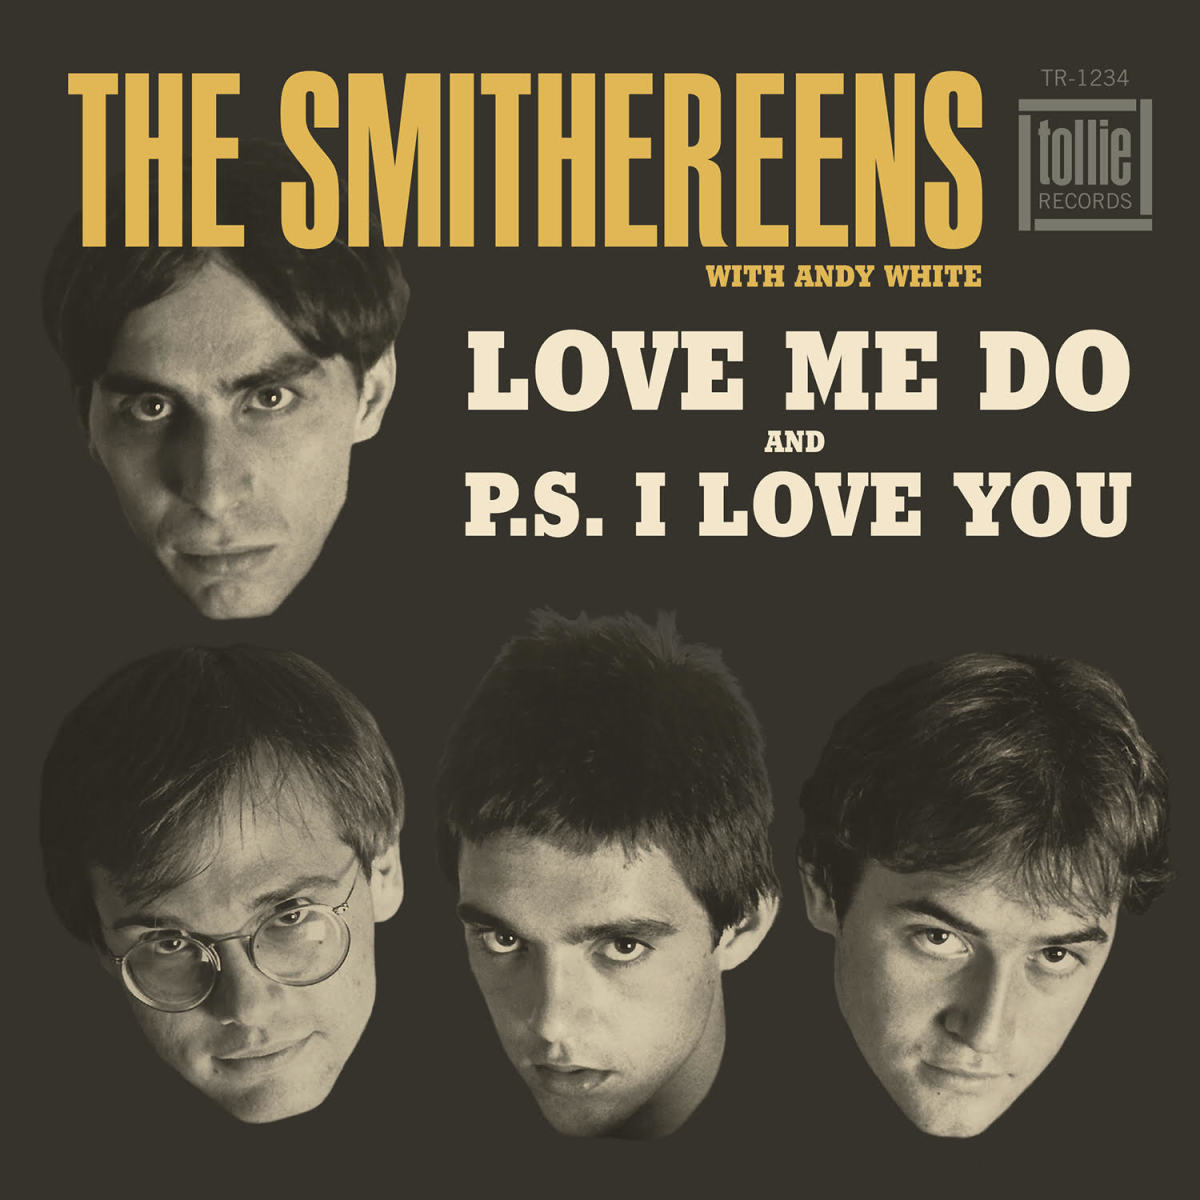 THE SMITHEREENS & ANDY WHITE  - Love Me Do / P.S I Love You - 7" - Vinyl [RSD2020-AUG29]